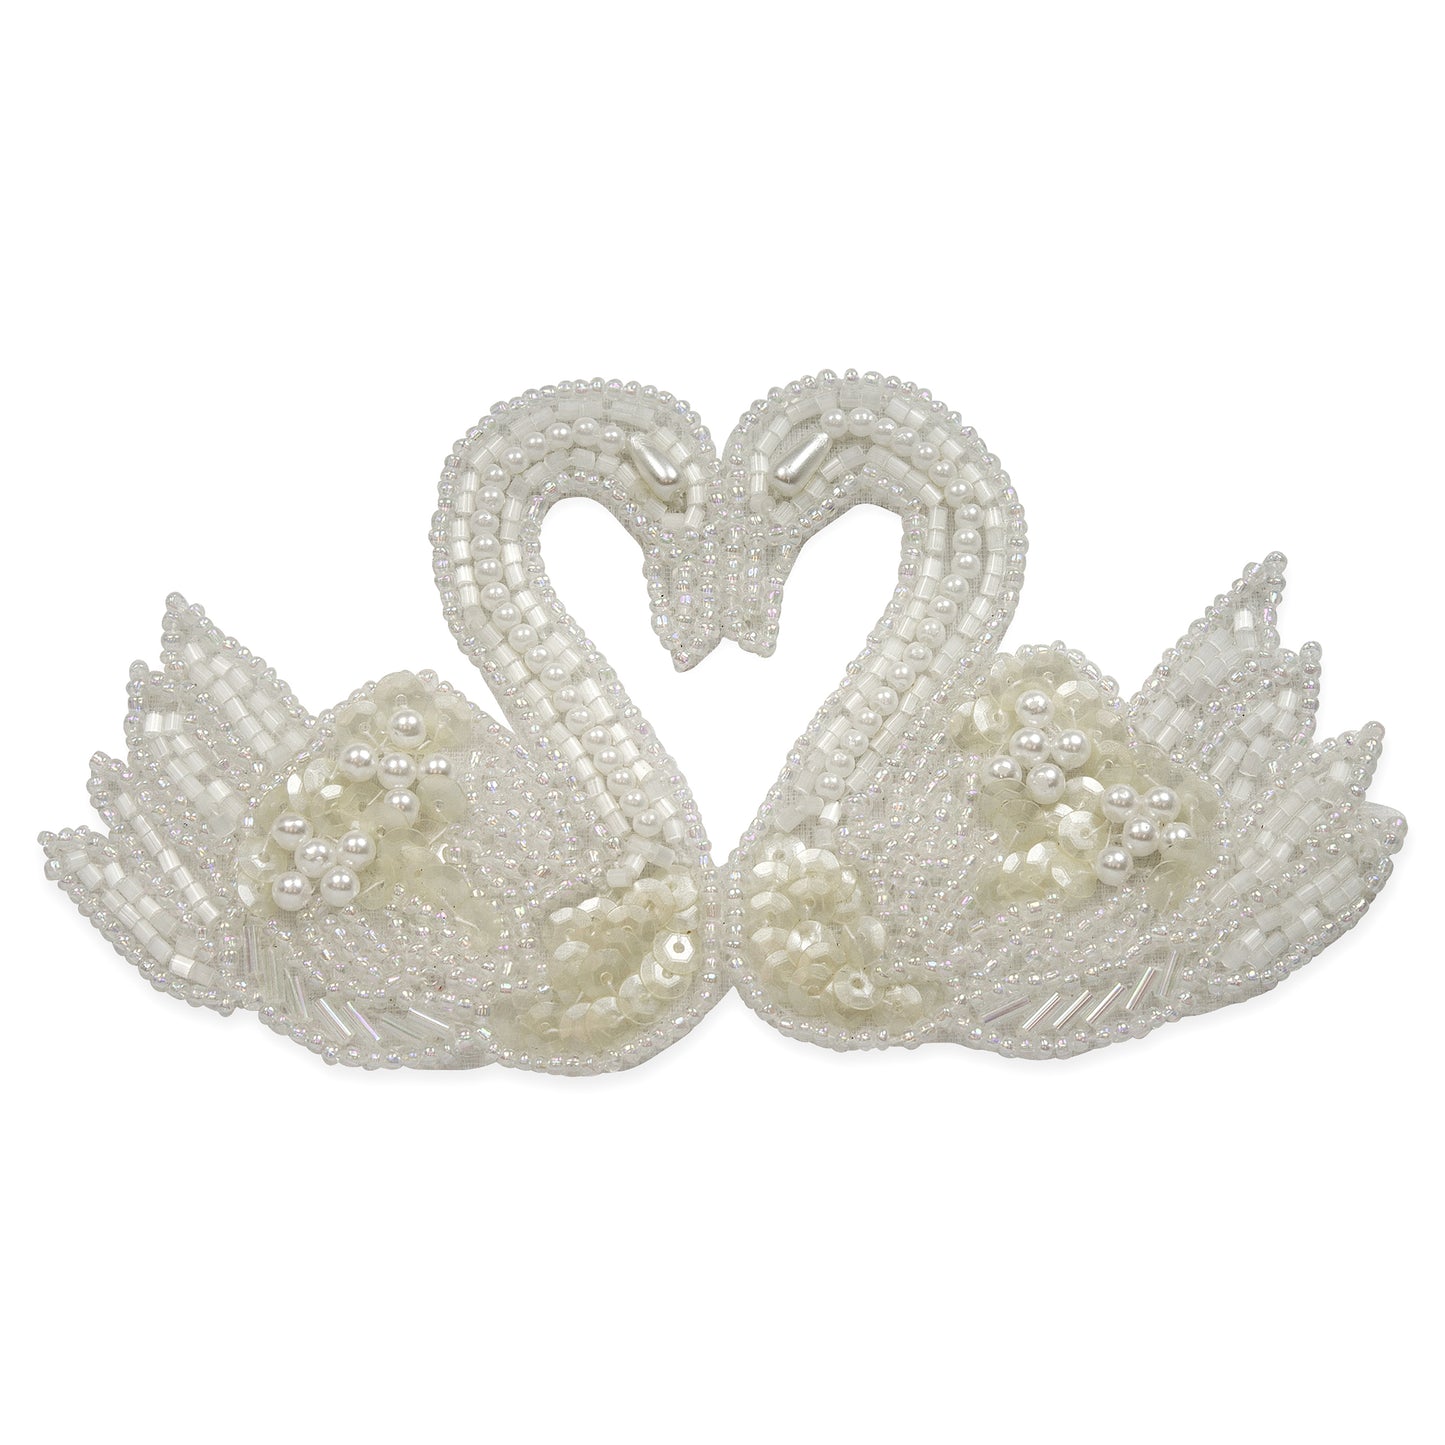 Vintage Bead and Sequin Swan Applique  - White